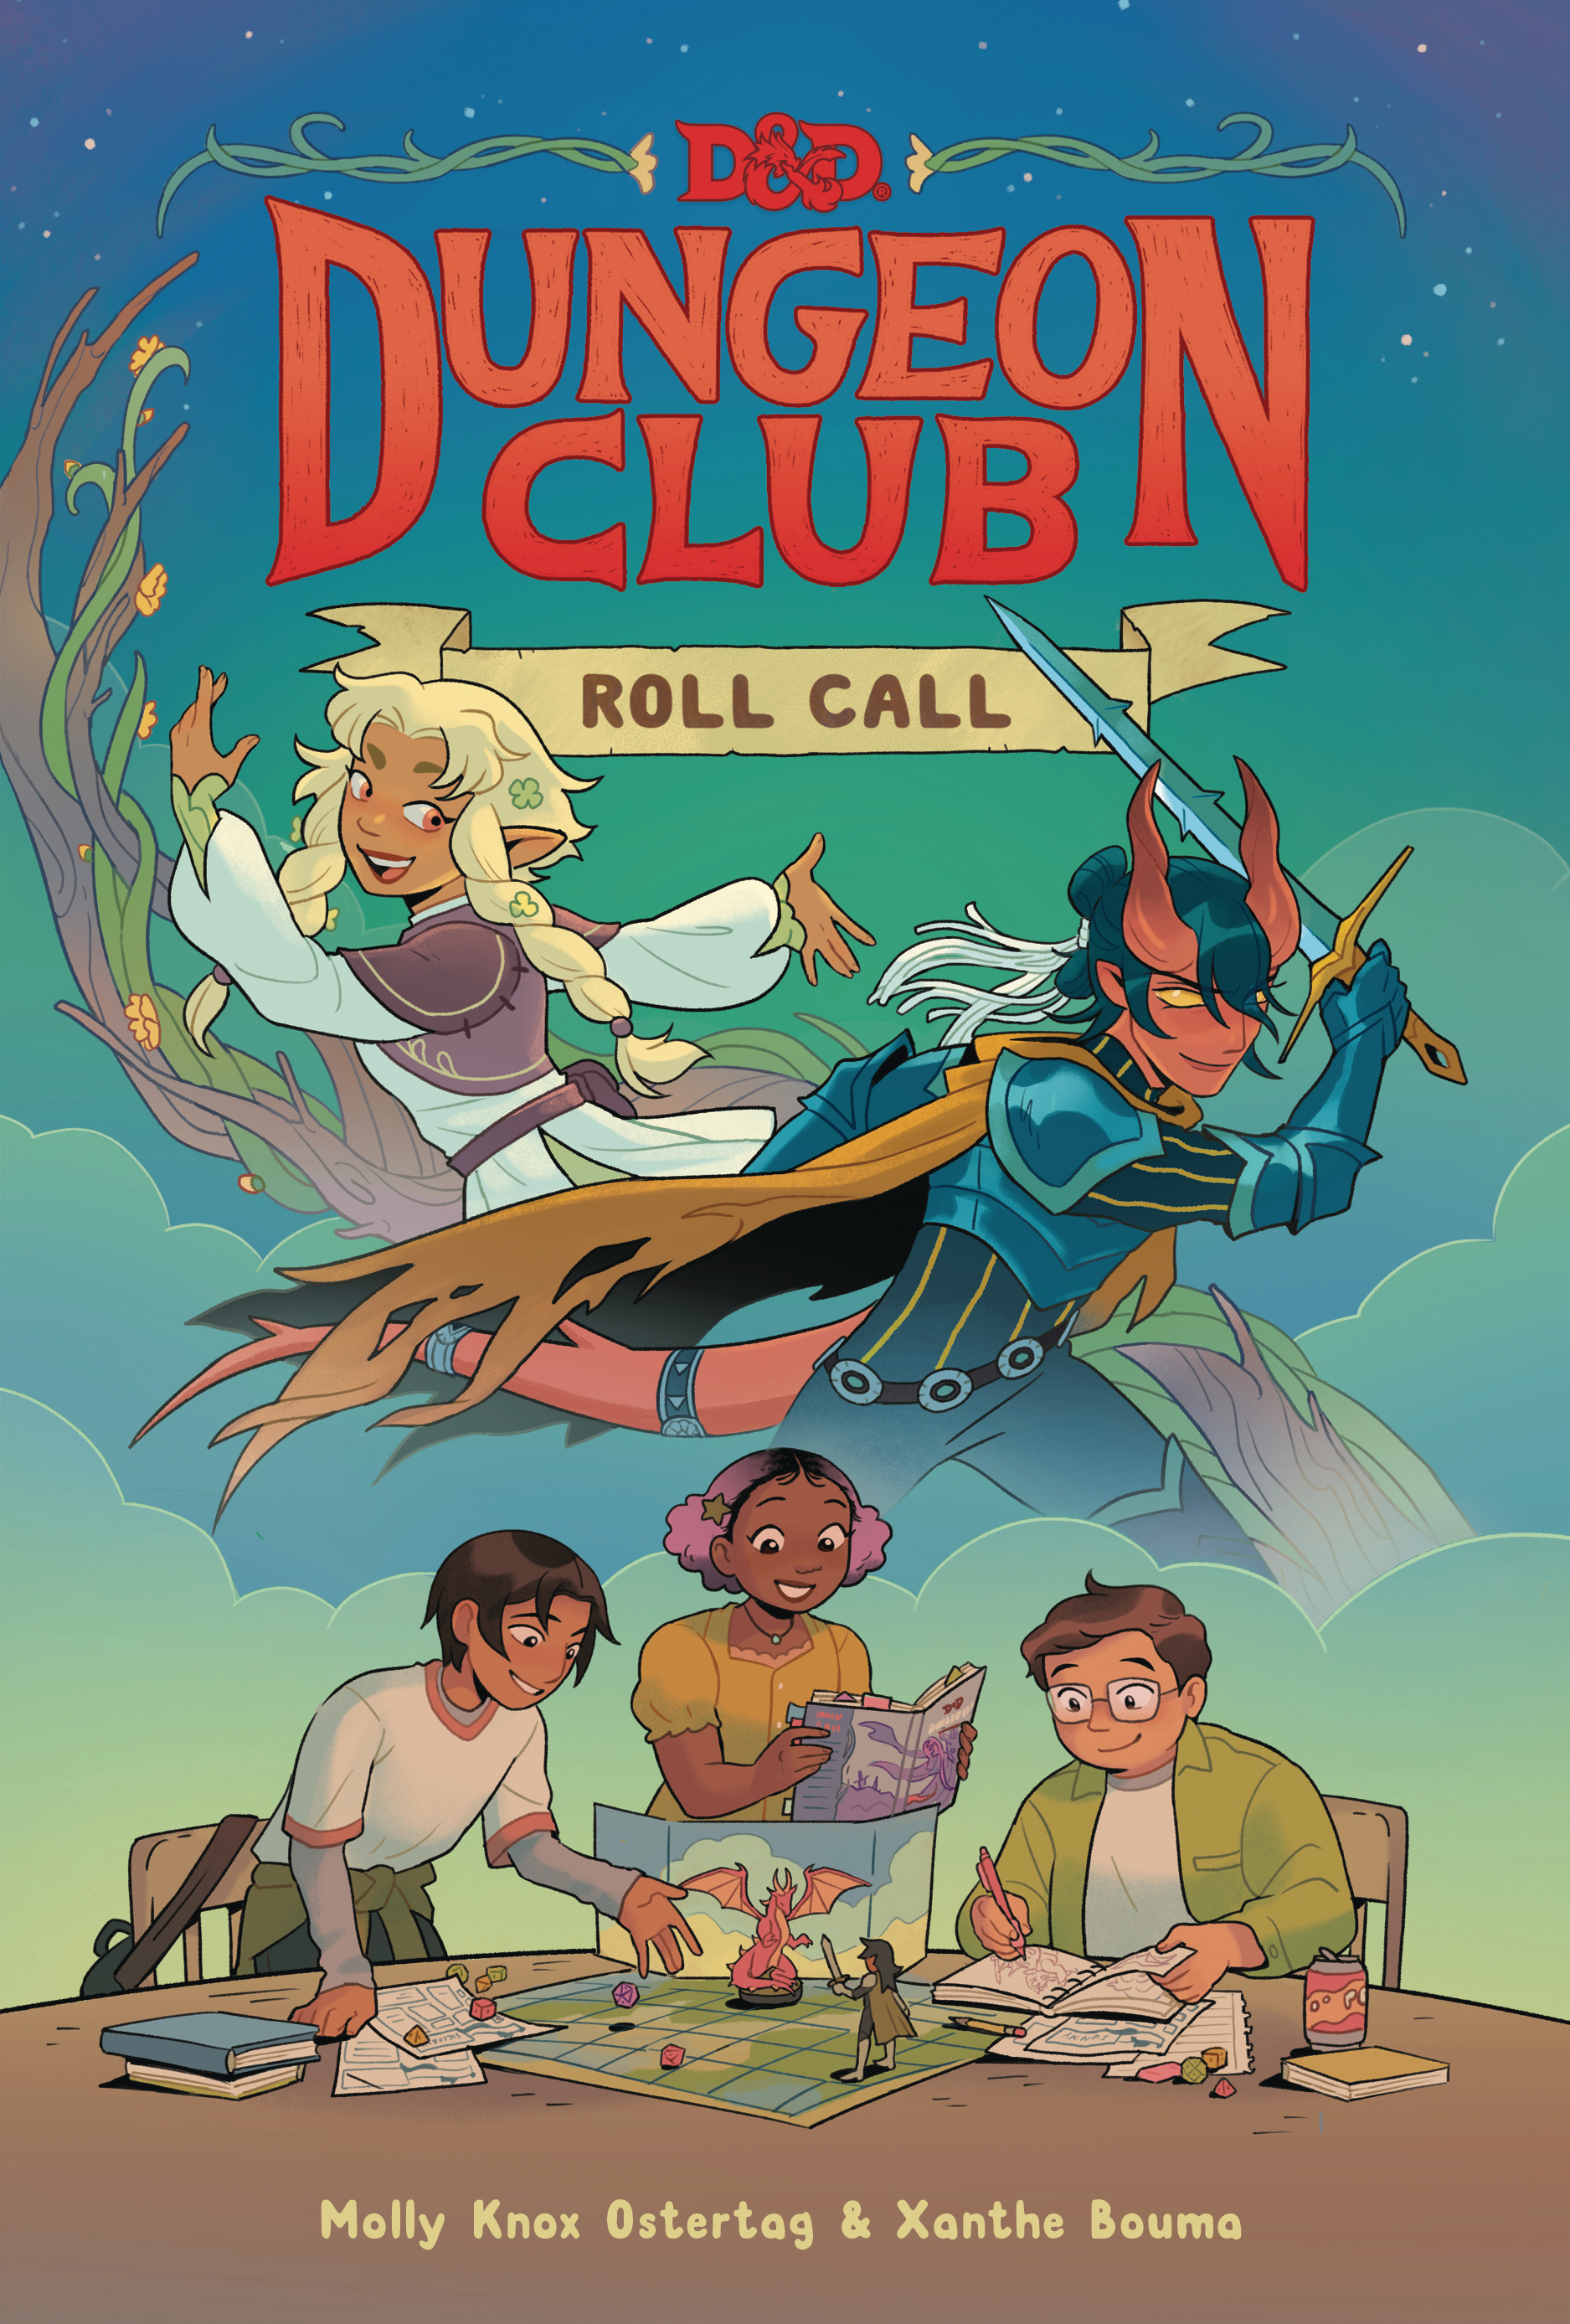 Dungeons & Dragons Dungeon Club Graphic Novel Volume 1 Roll Call